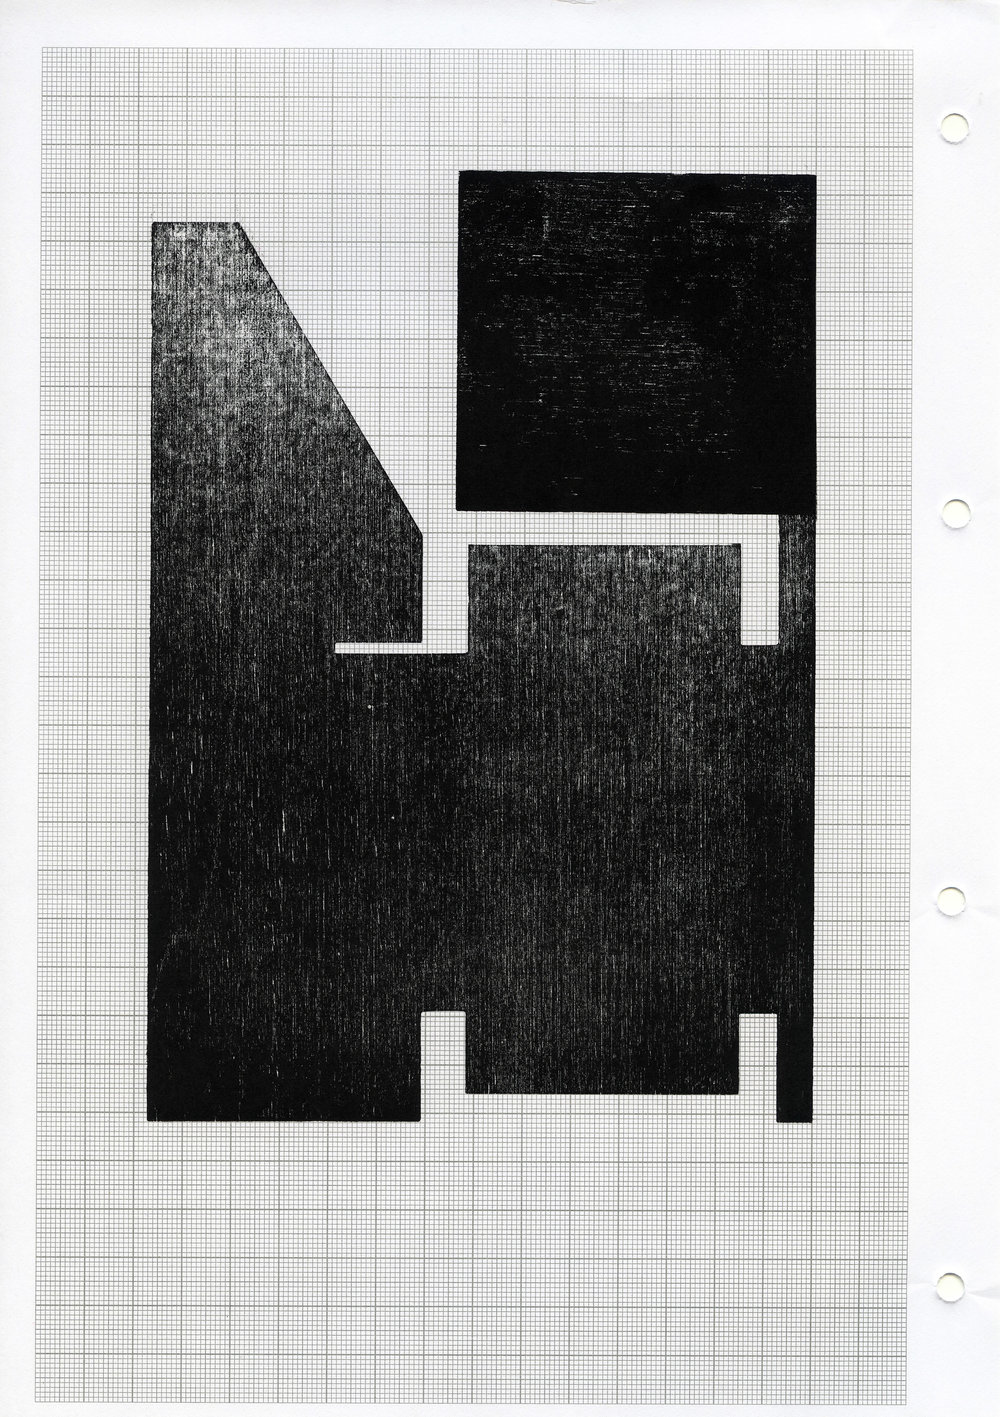  Seher Shah, ‘Hewn (square on cut)’, 2014, woodcut on A4 grid paper, monoprint, 29.7 x 21 cm. Image courtesy the artist and Nature Morte. 